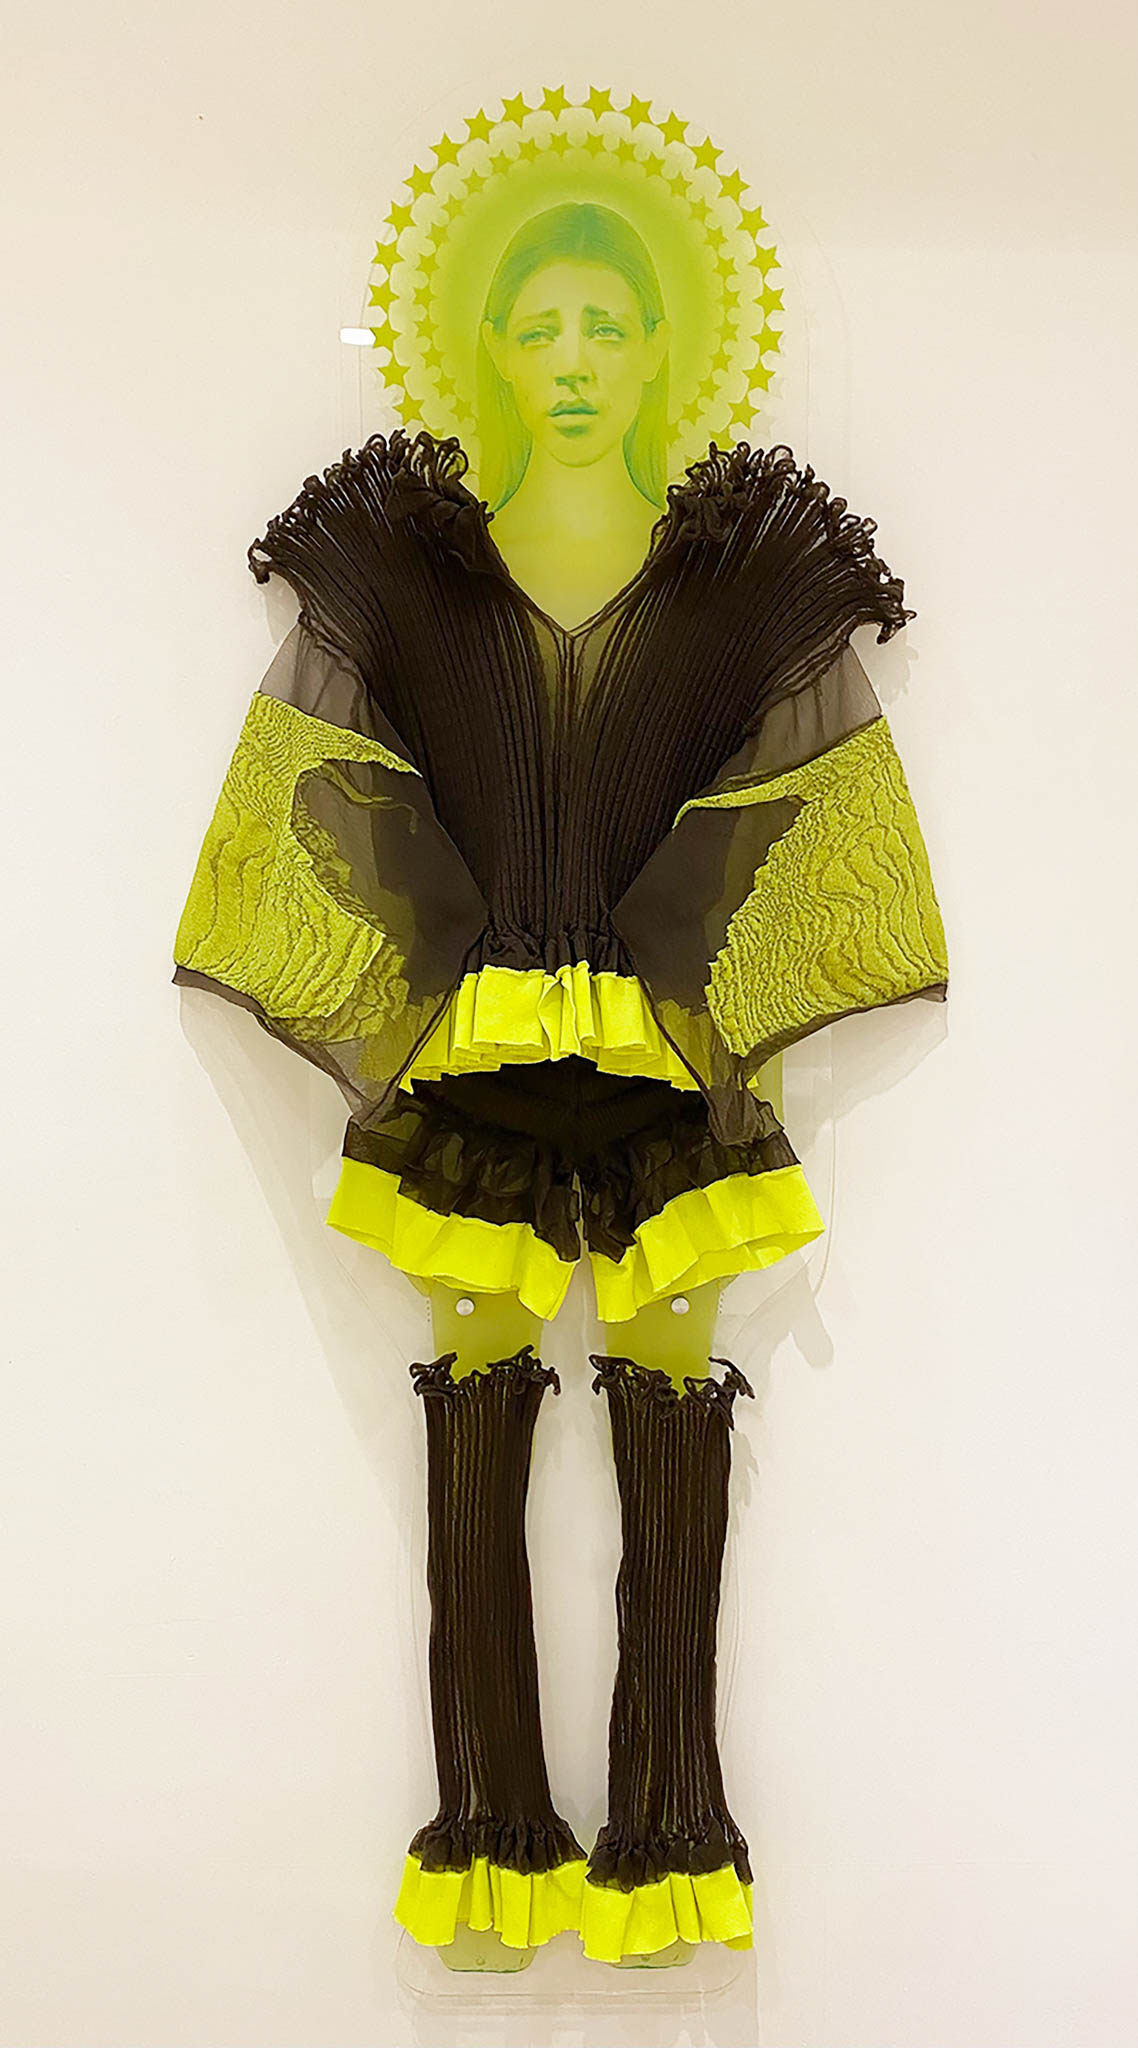 One neon green printed women wearing a ruffled dark grey and neon yellow garment from the Veiling Veronicas series. The piece is mounted to a white wall as if it's floating.